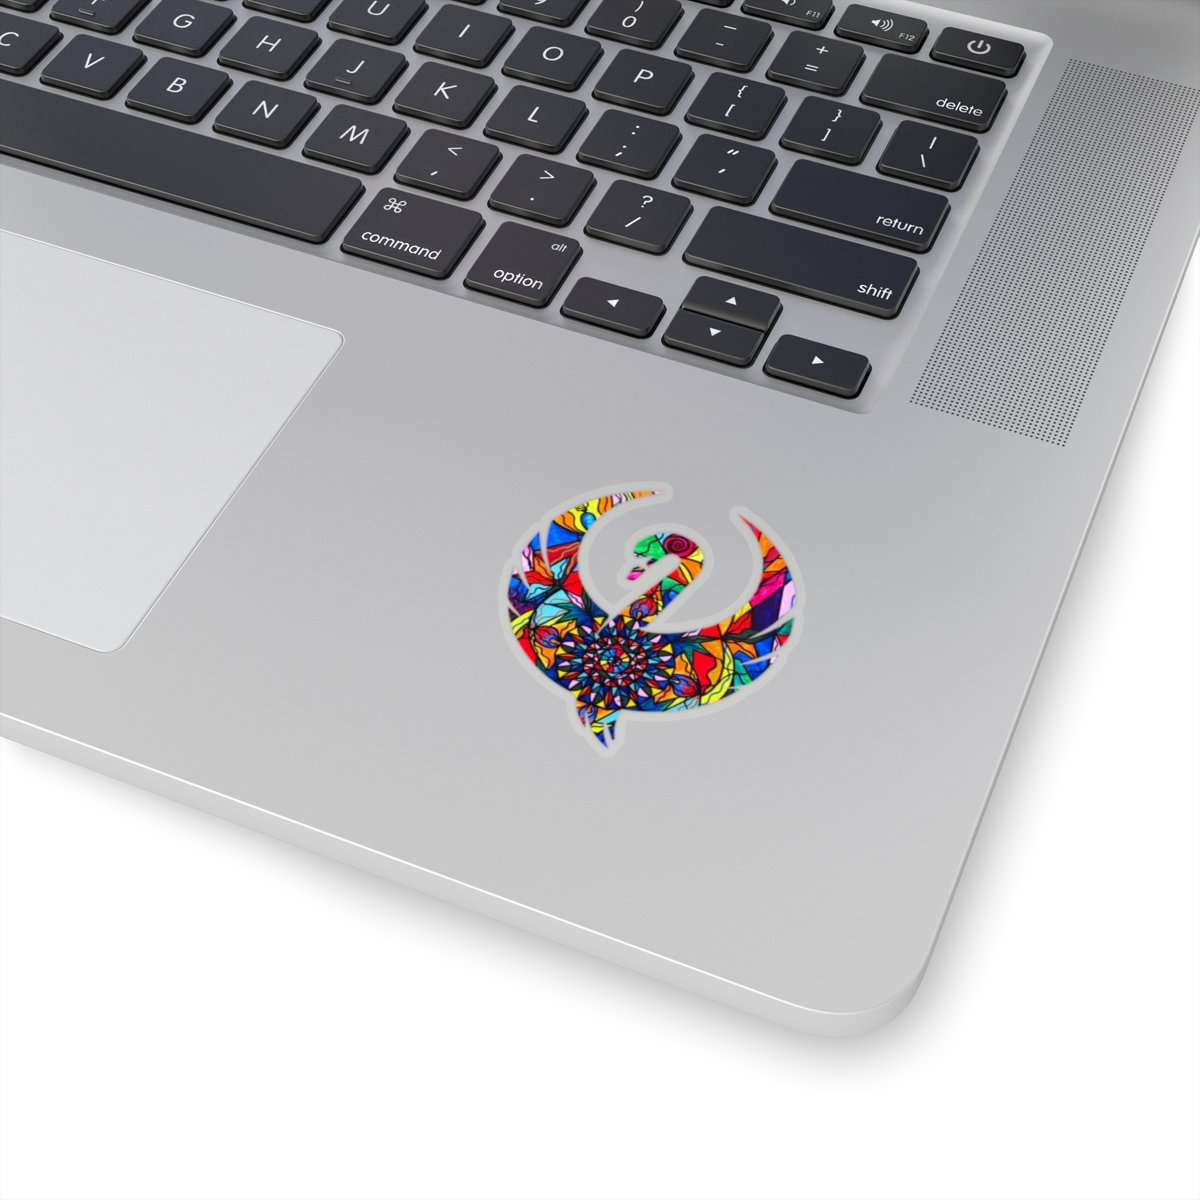 find-wholesale-i-now-show-my-unique-self-swan-stickers-on-sale_1.jpg